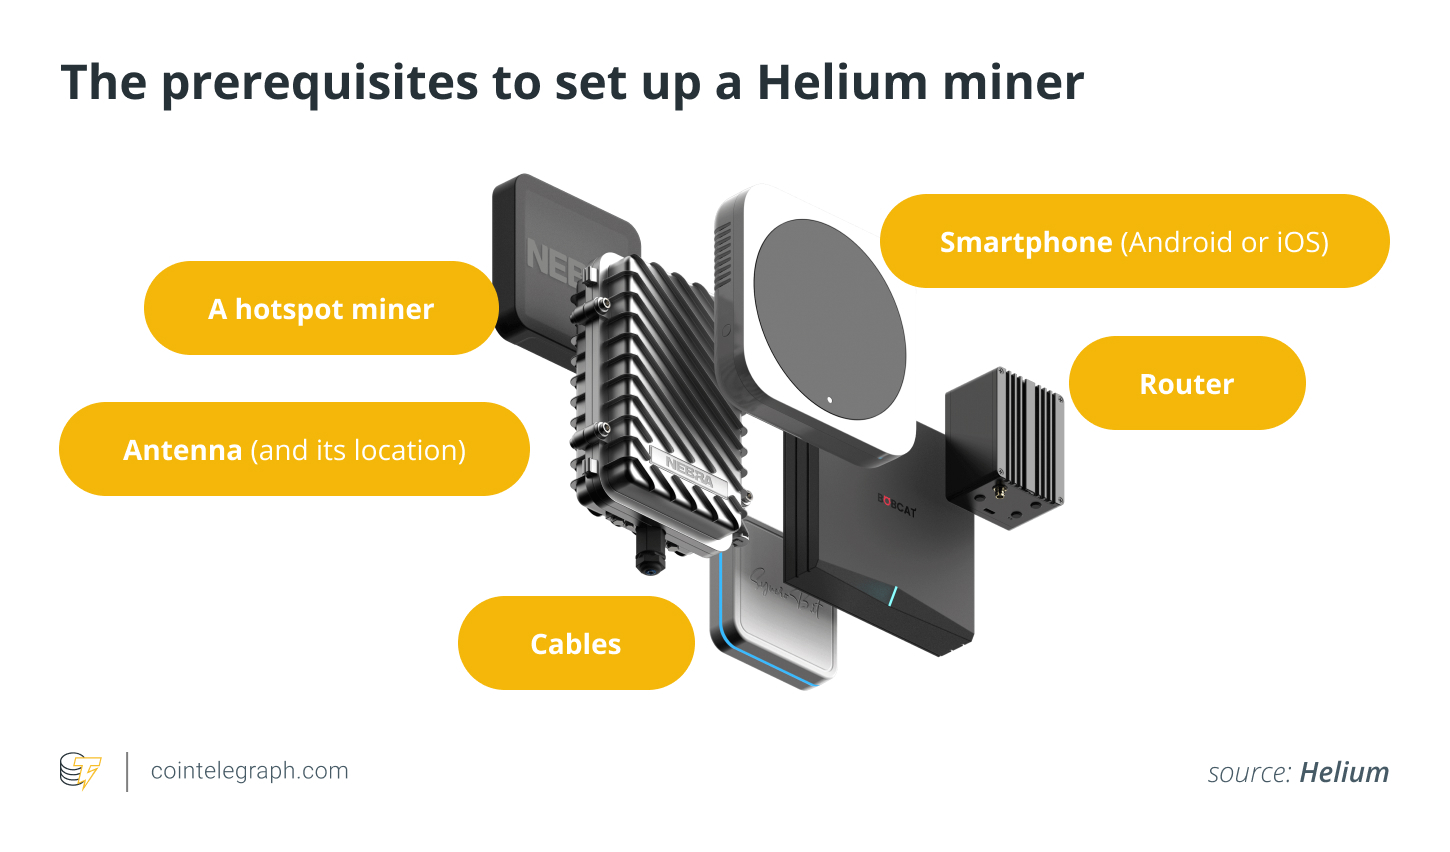 The prerequisites to set up a Helium miner